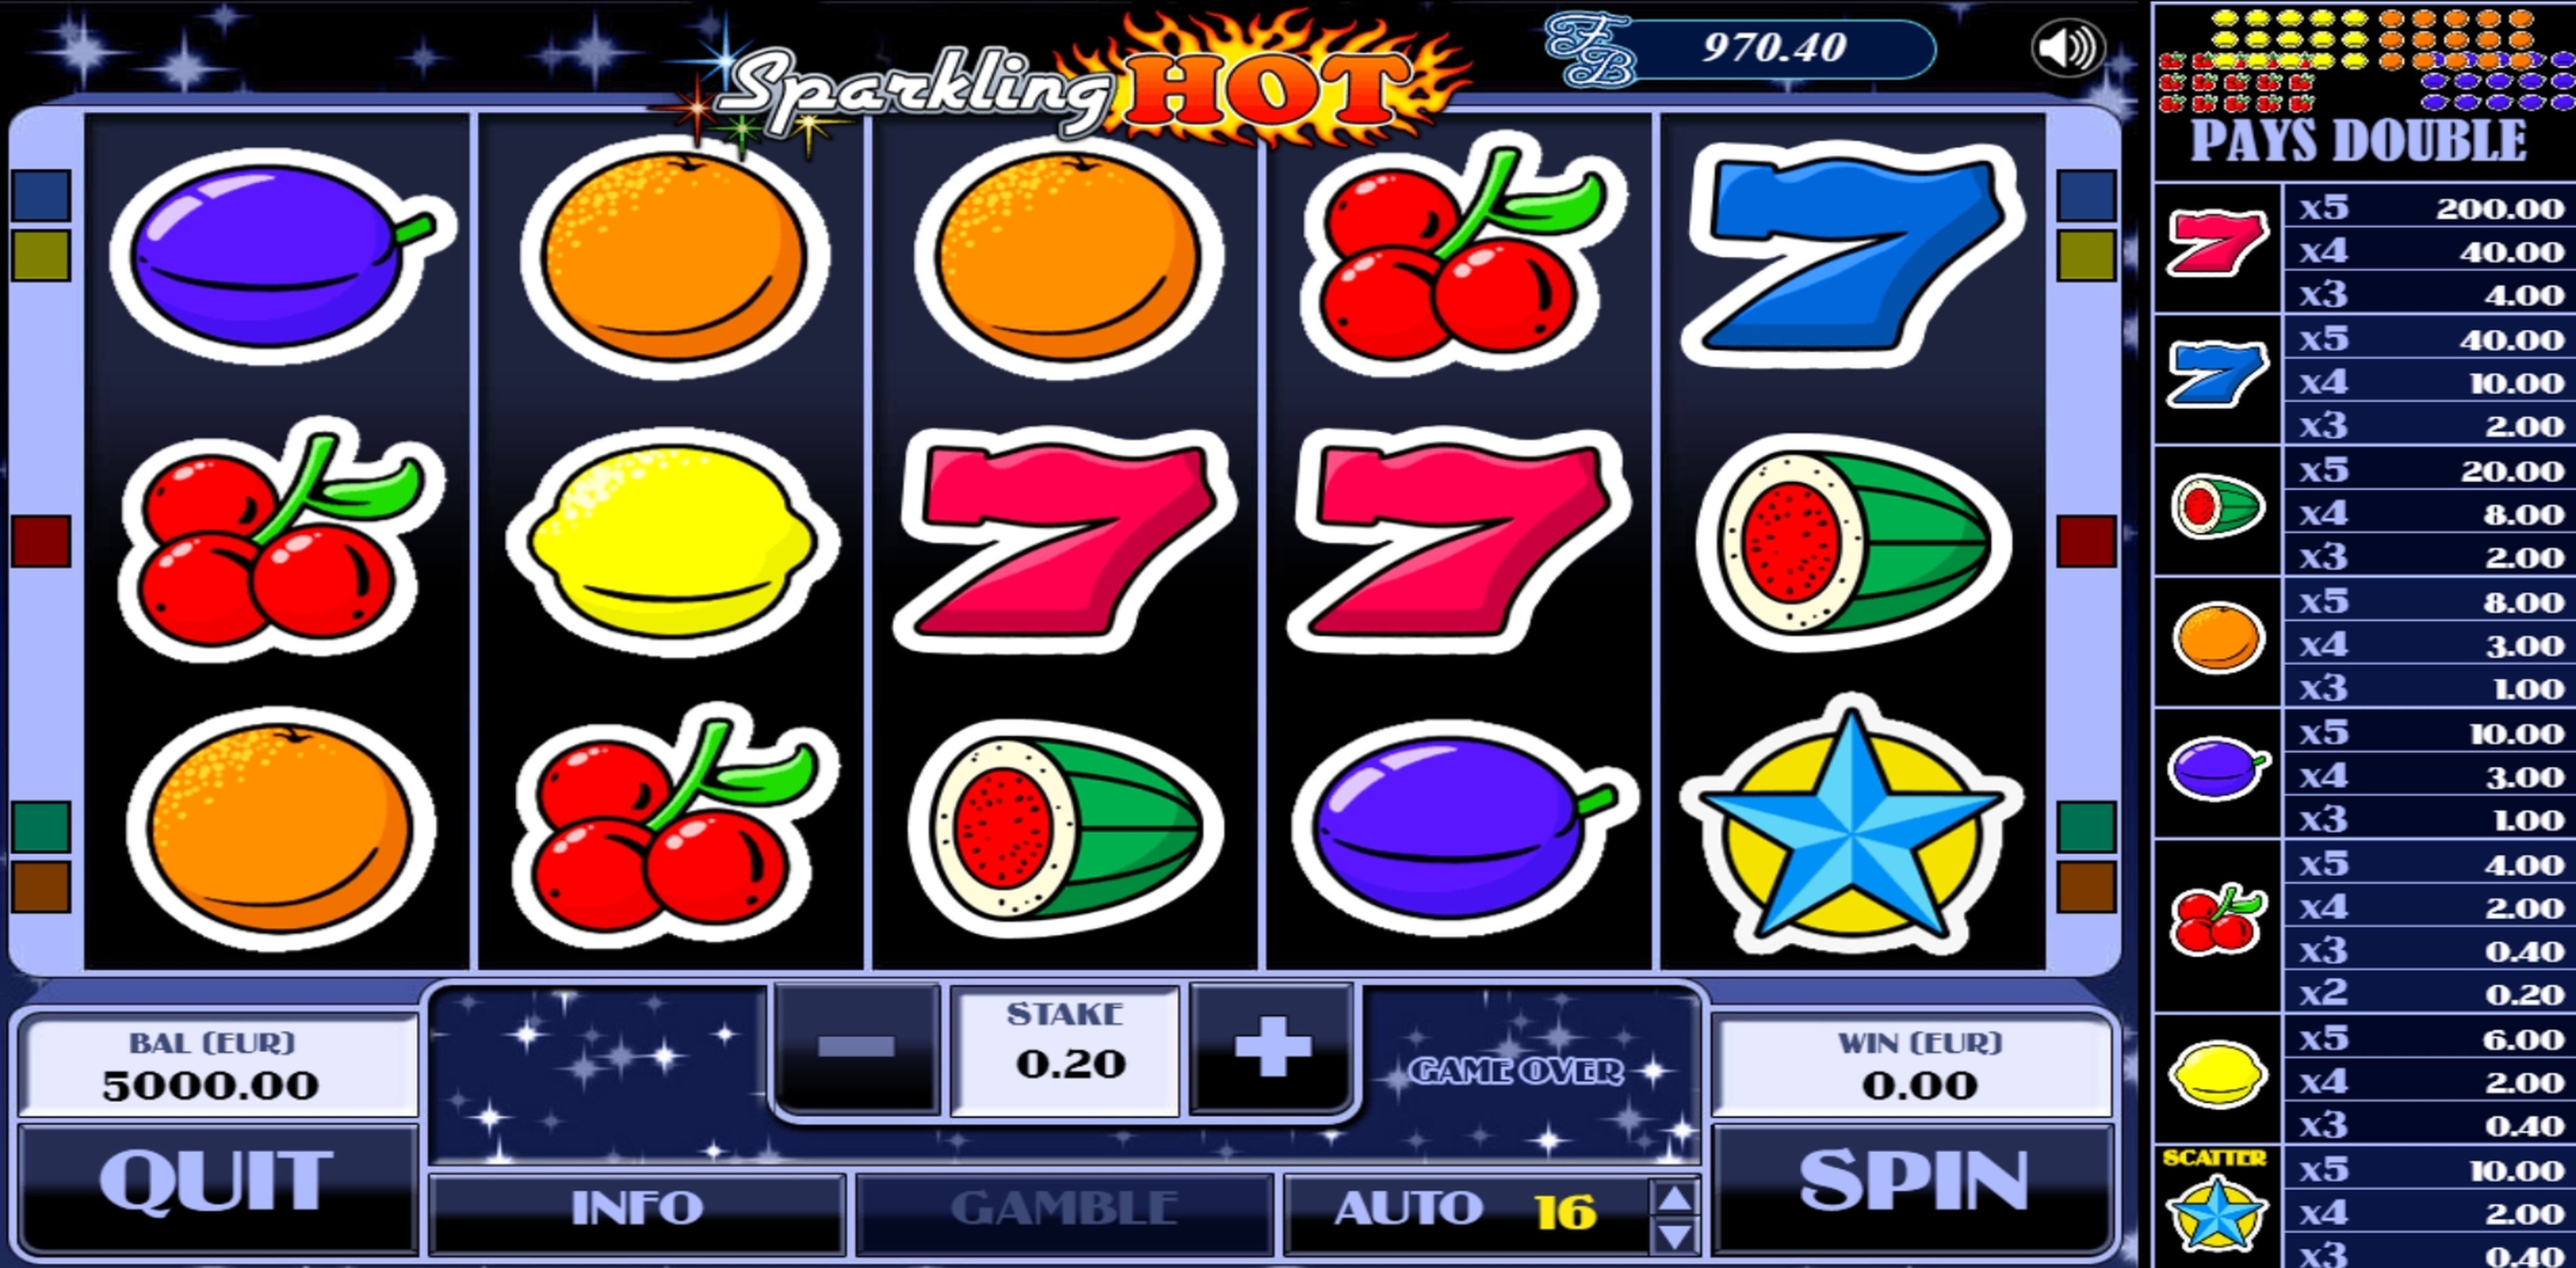 Reels in Sparkling Hot Slot Game by AlteaGaming